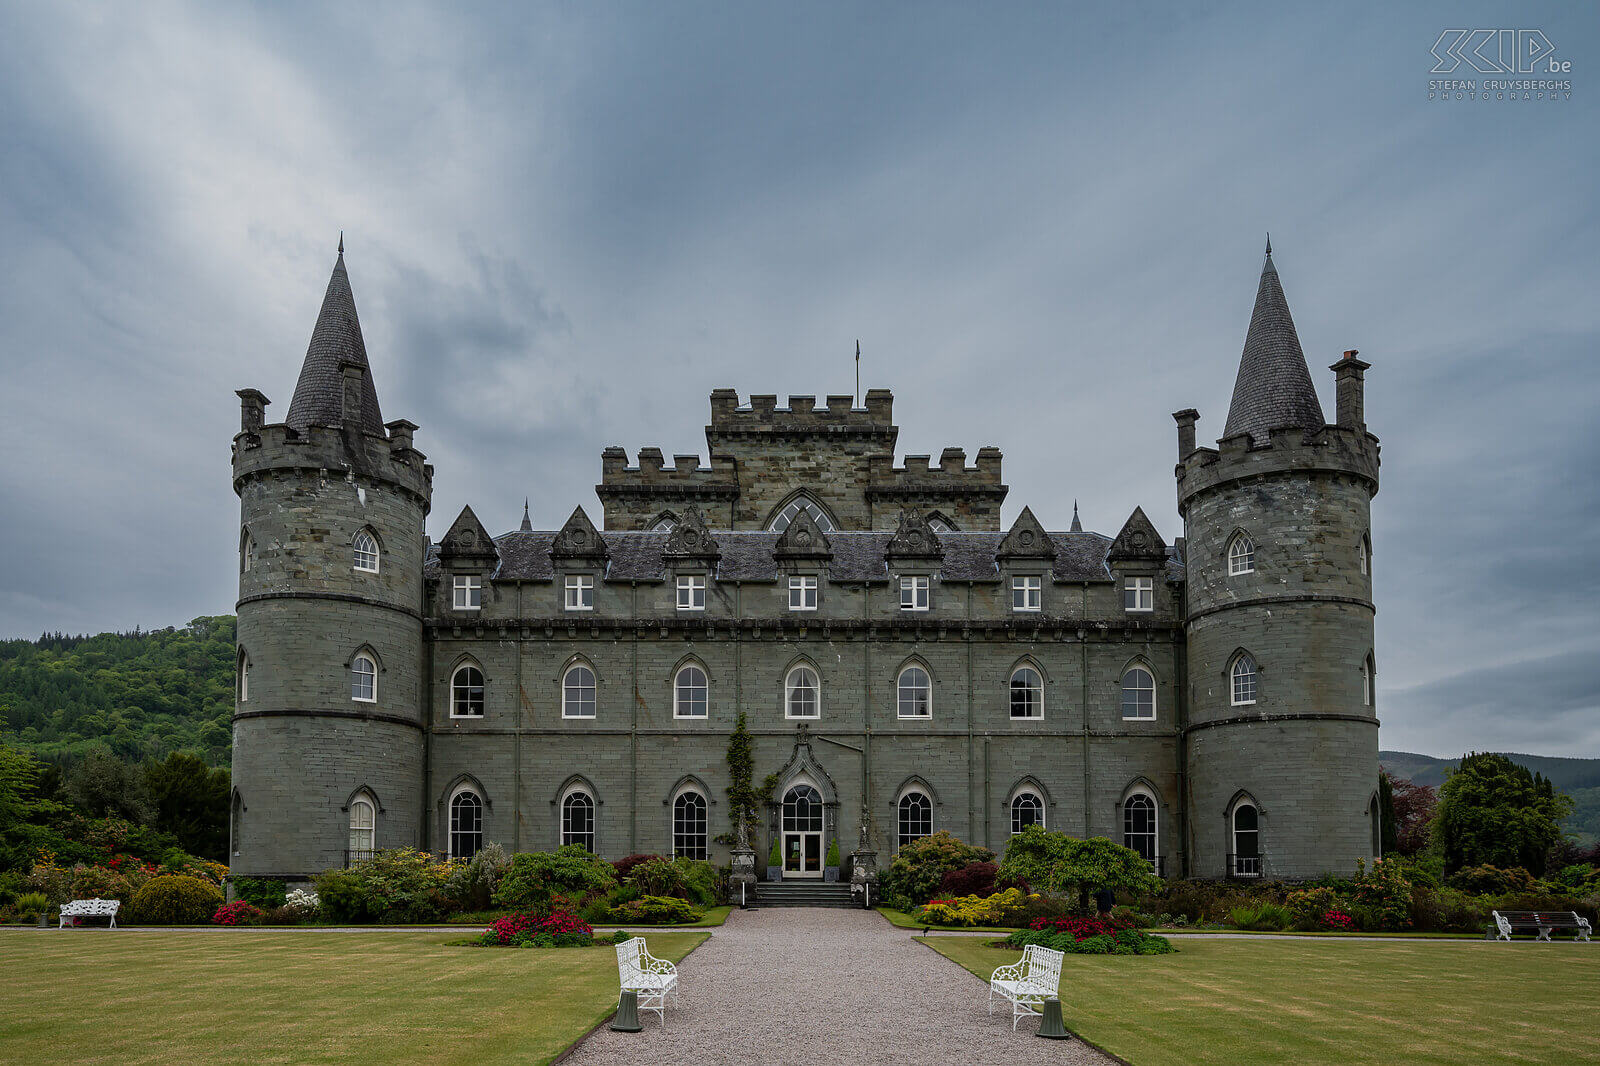 Inveraray - Inveraray Castle The town of Inveraray is located on the west coast of Loch Fyne. The town is truly in a picturesque location on the lake. The main attraction is the beautiful Inveraray Castle. This neo-Gothic castle dates from 1746 and has a very beautiful interior, large landscaped garden and a large collection of Scottish weaponry. Stefan Cruysberghs